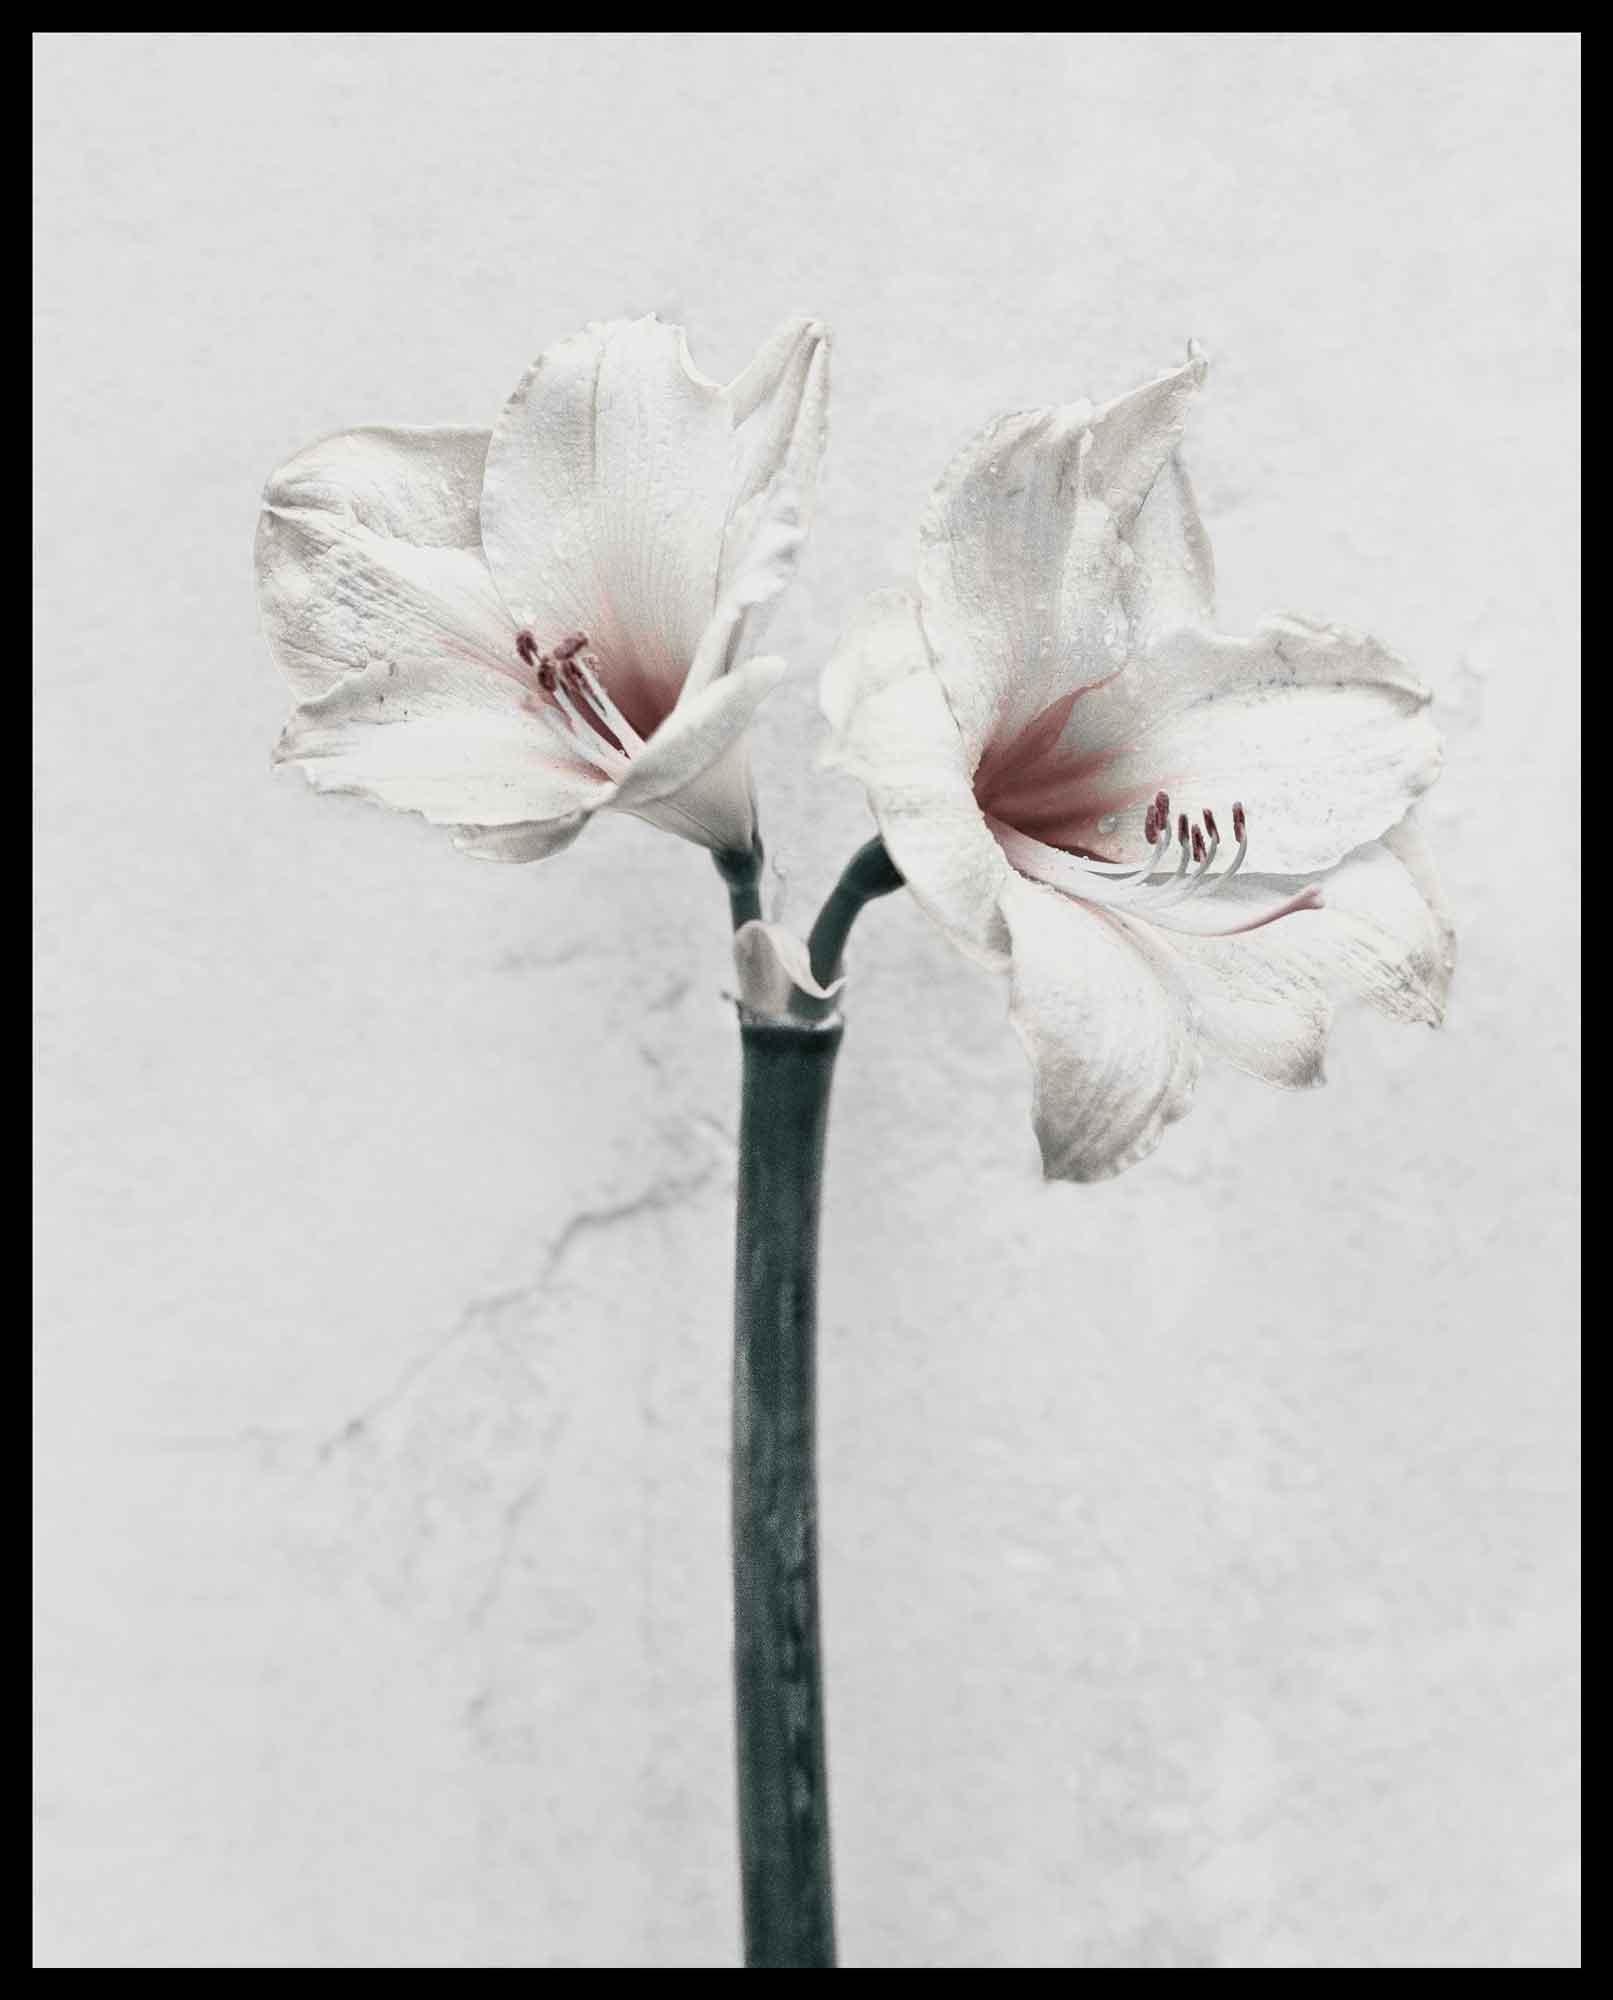 Botanica is a collection of portraits of flowers photographed in black and white then subtly coloured to enhance and transform them. This series symbolises a moment of peaceful solitude in a world that is becoming increasingly complex, creating a